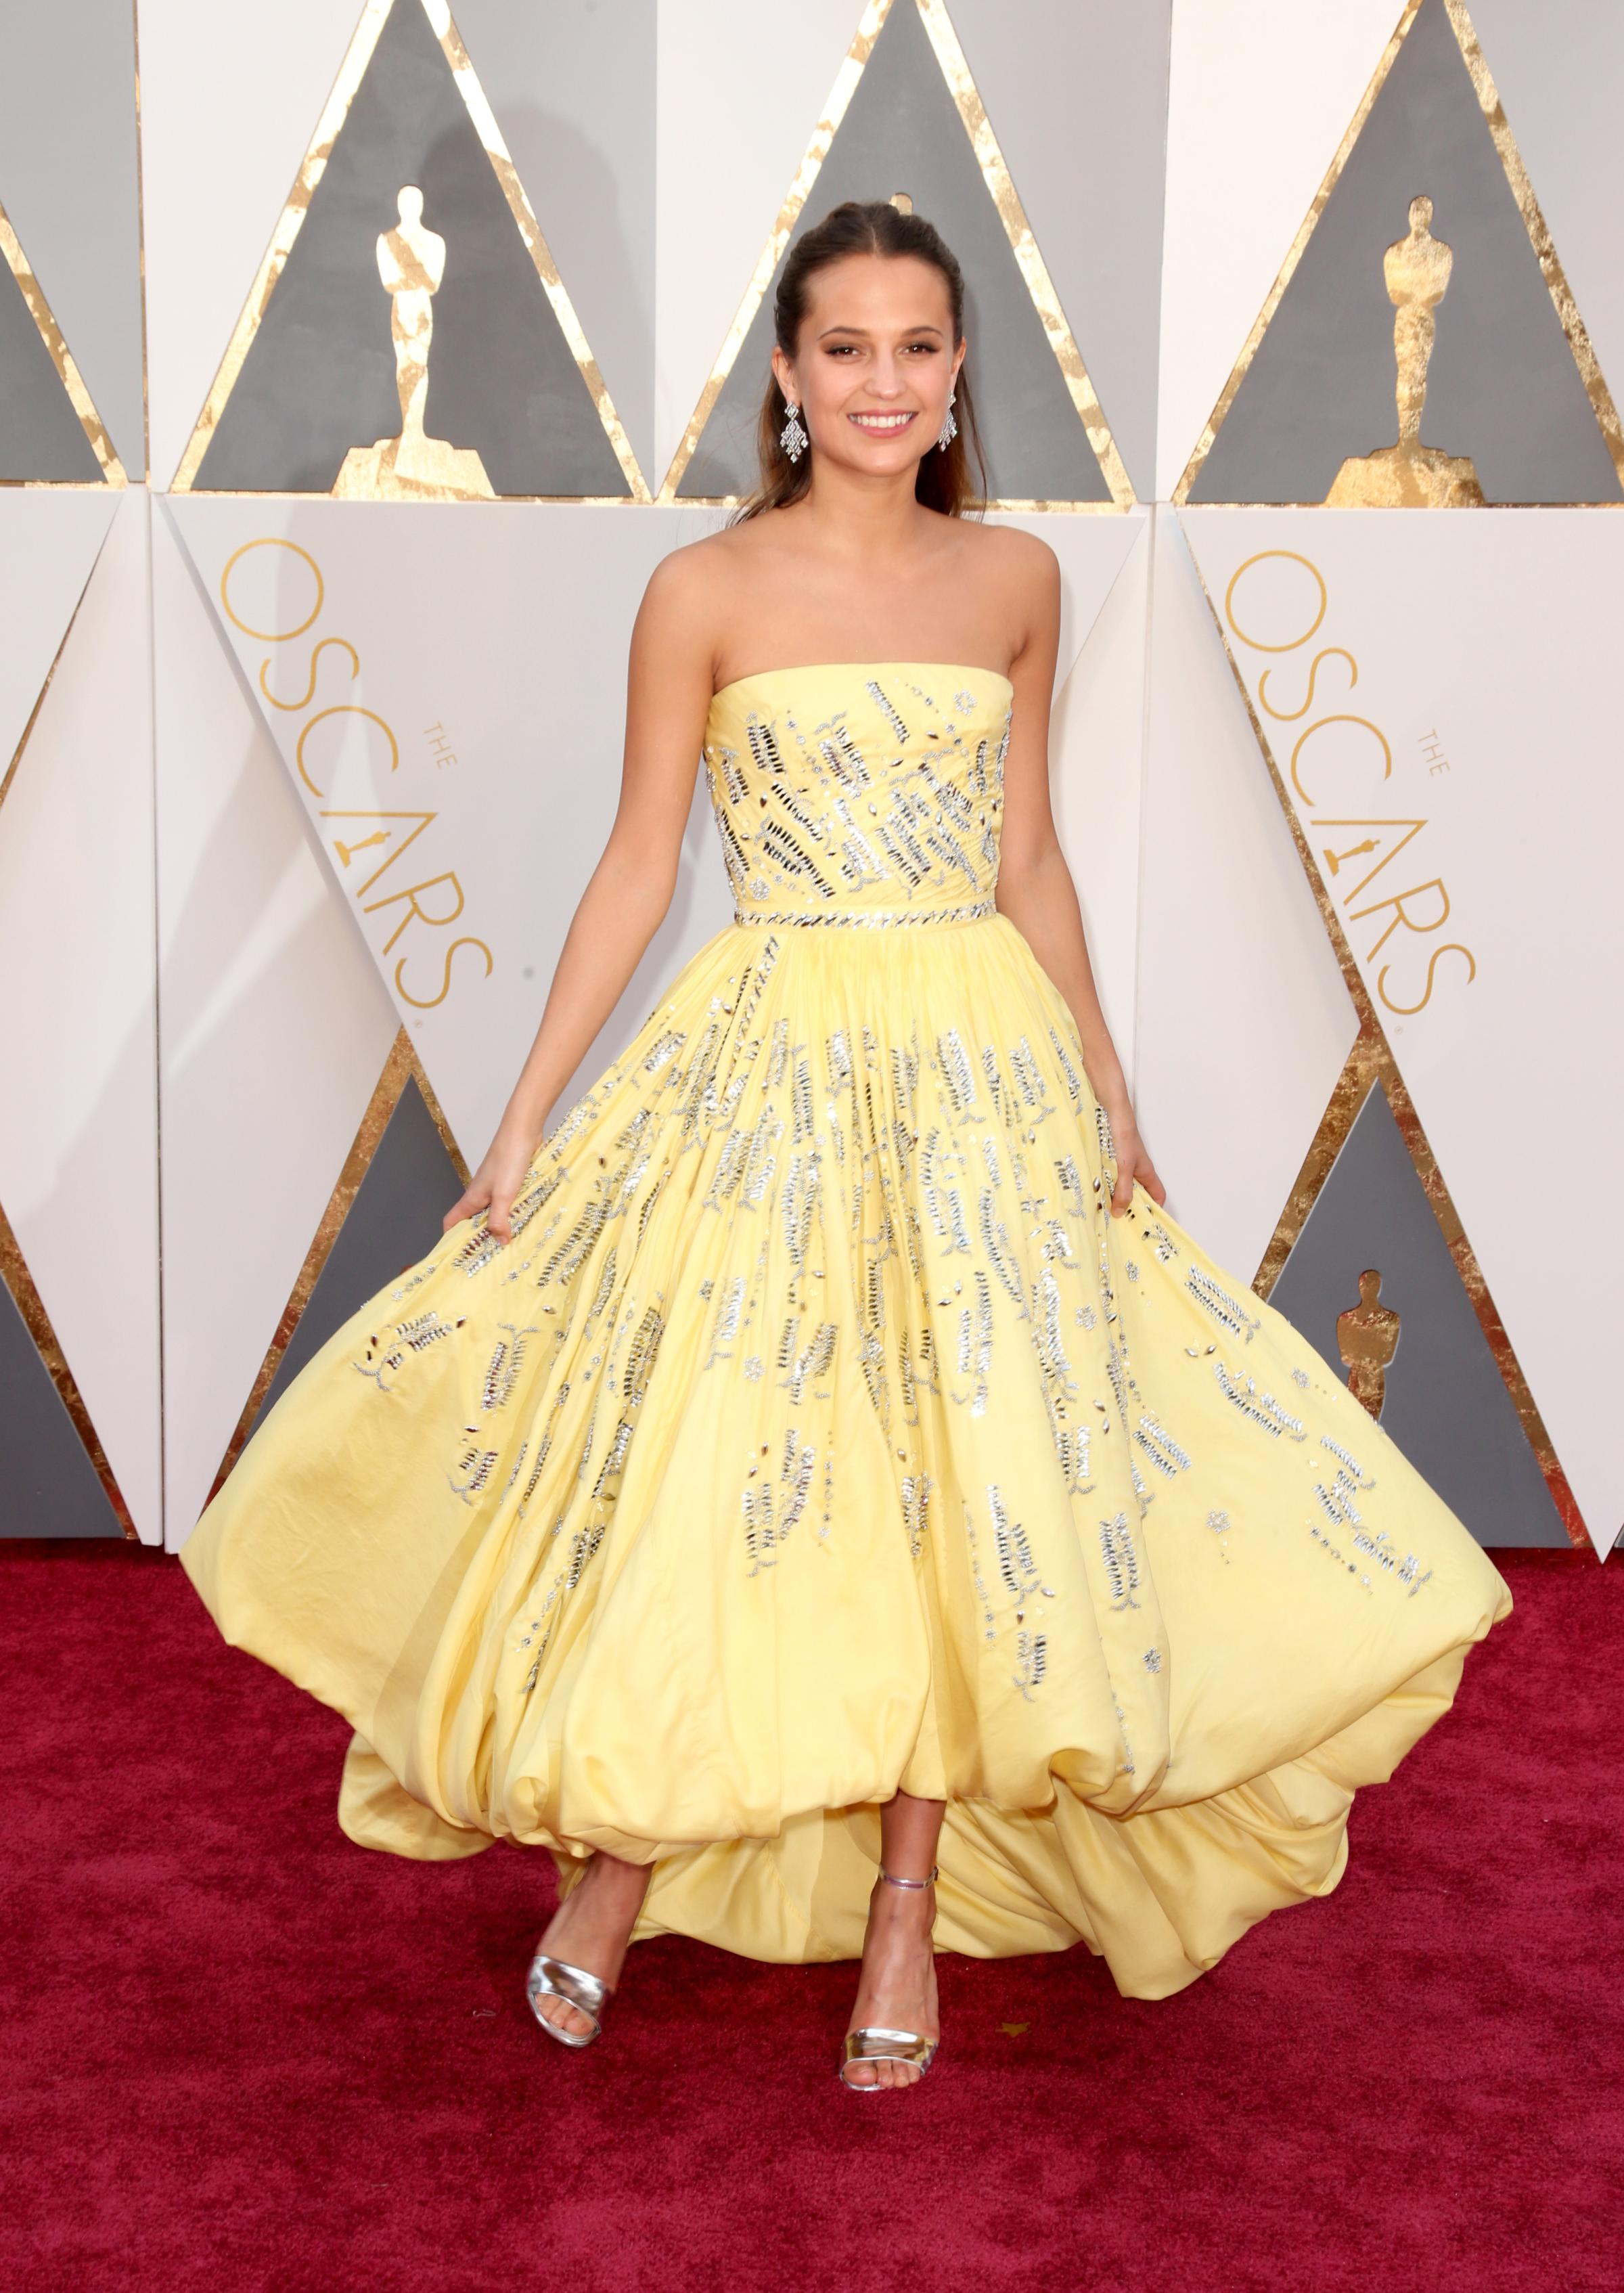 Alicia Vikander attends the 88th Annual Academy Awards on Feb. 28, 2016 in Hollywood, Calif.